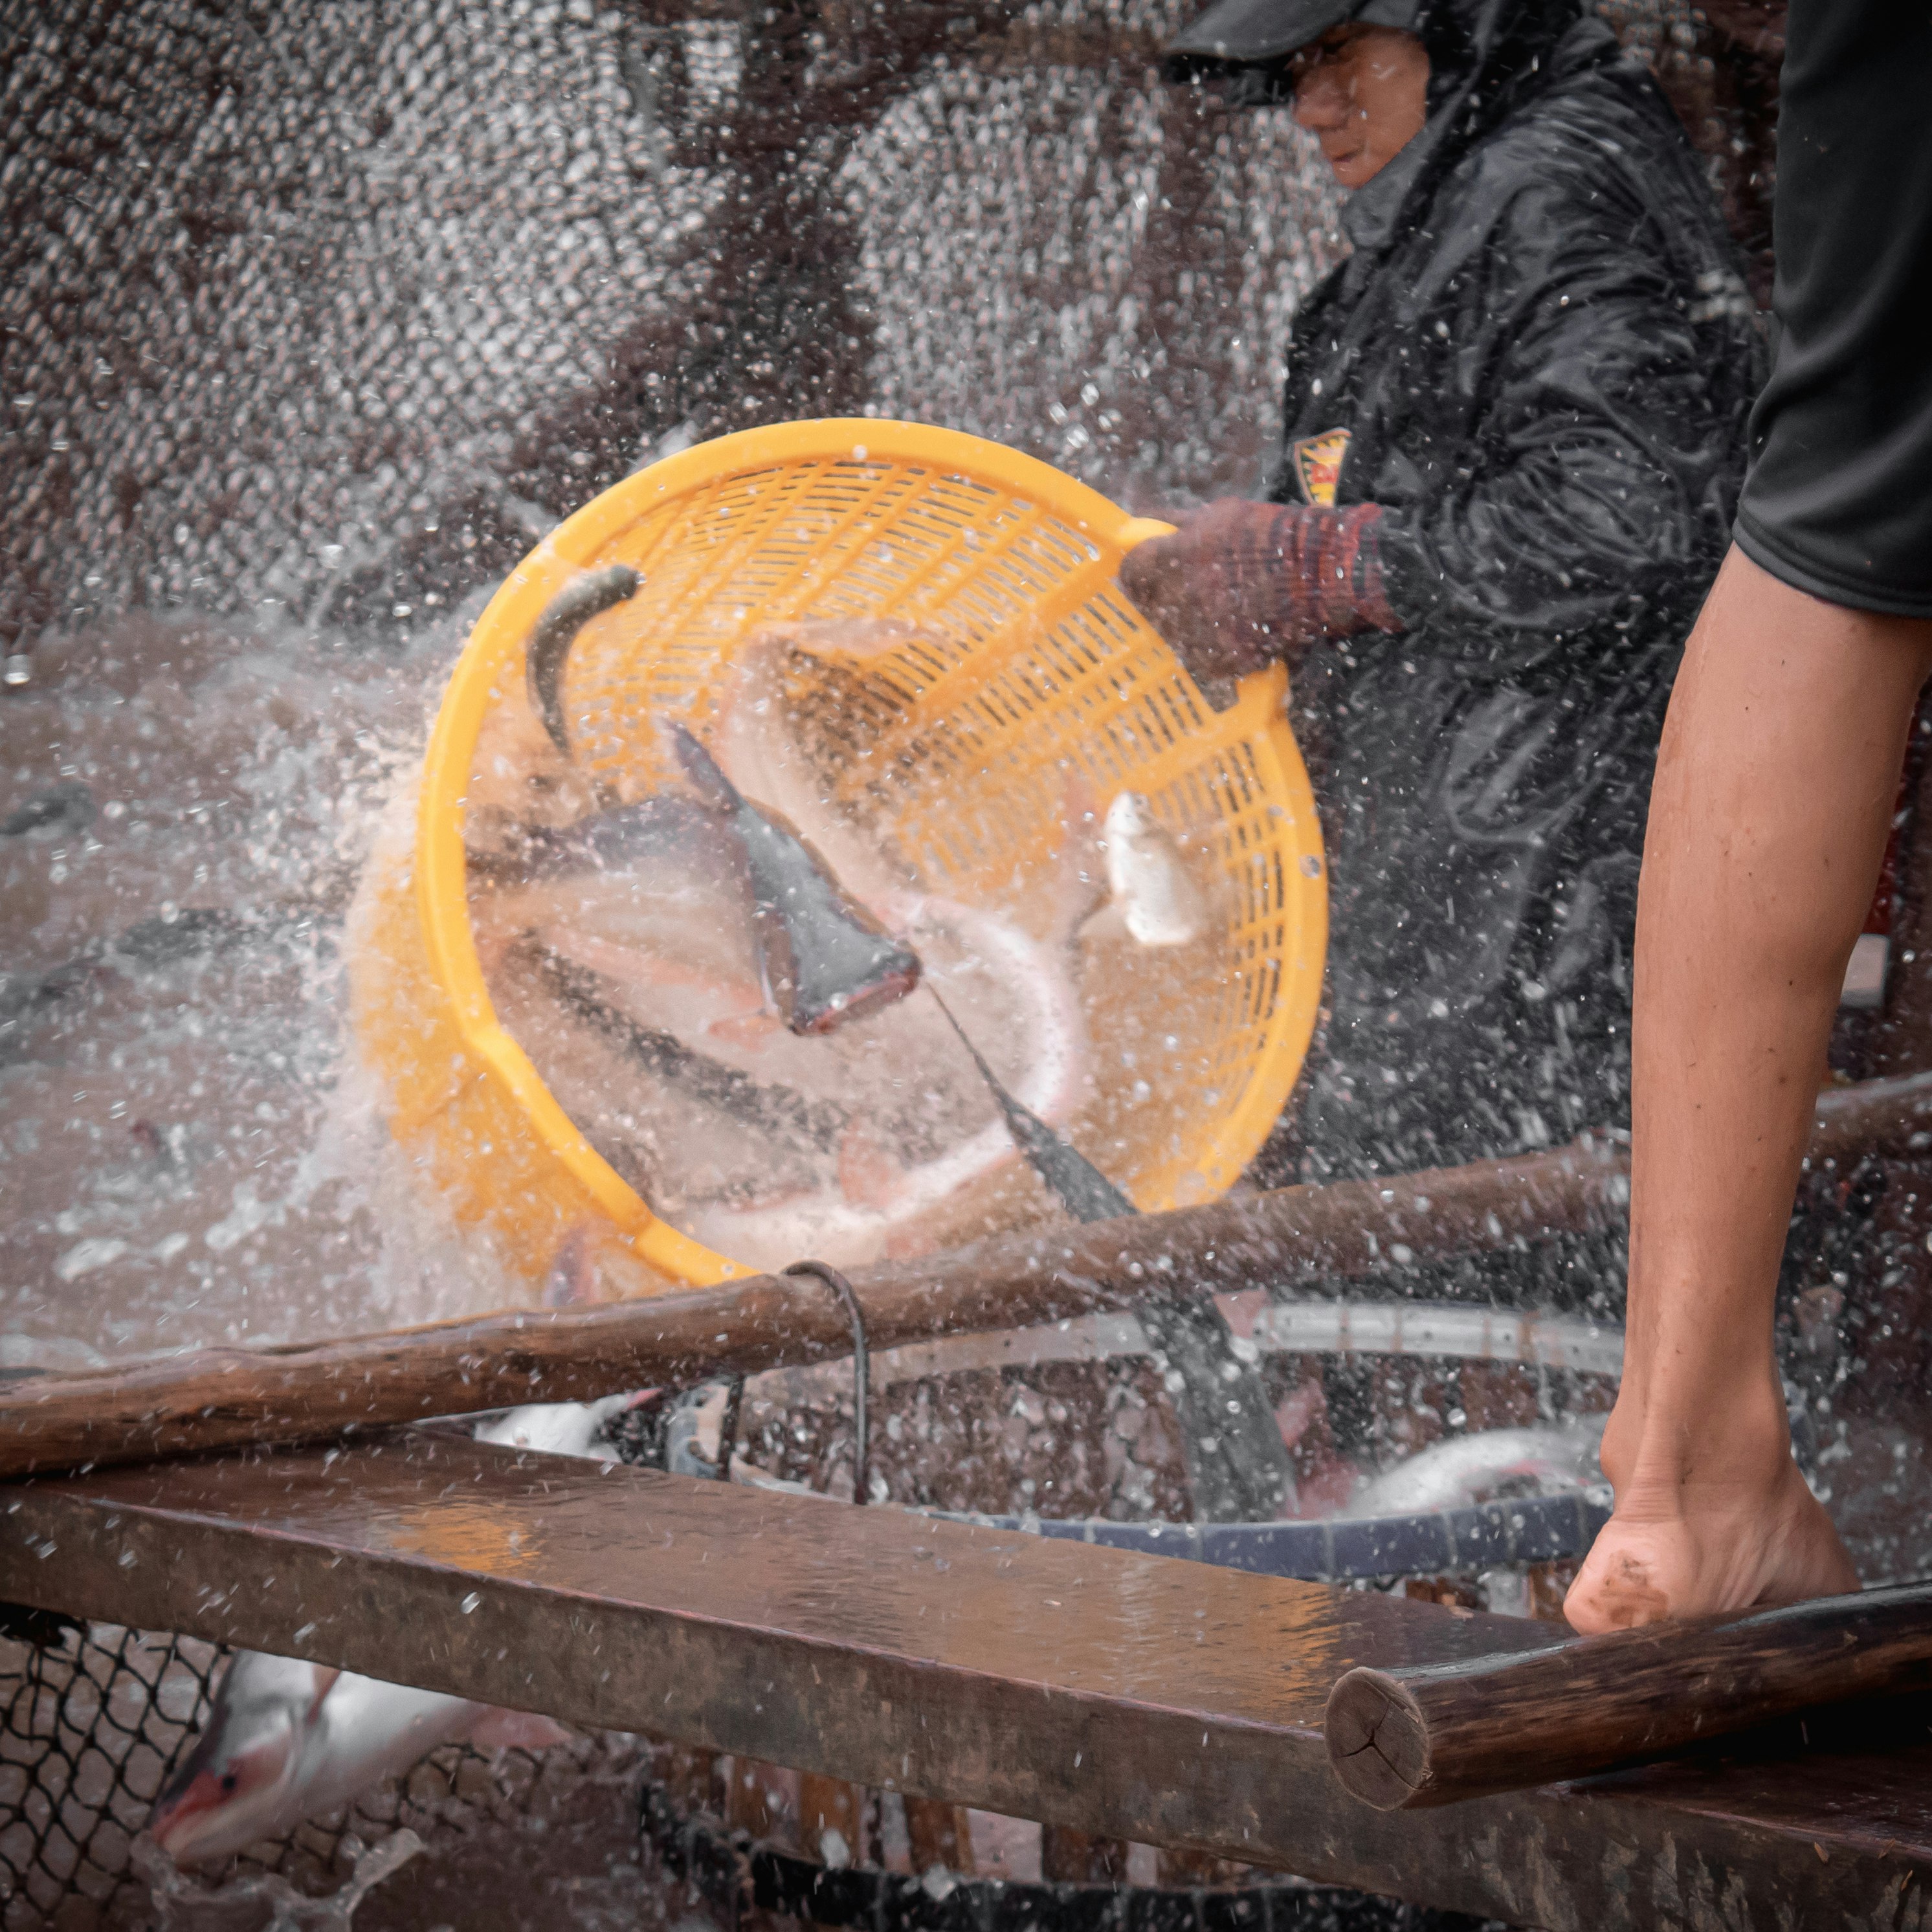 What working on a fish farm in Vietnam looks like. Three people work in sync to catch, lift and transport big catfish to the boat. 

Shot on Canon EOS 1300D w/ 18-55mm f3.5 - 5.6